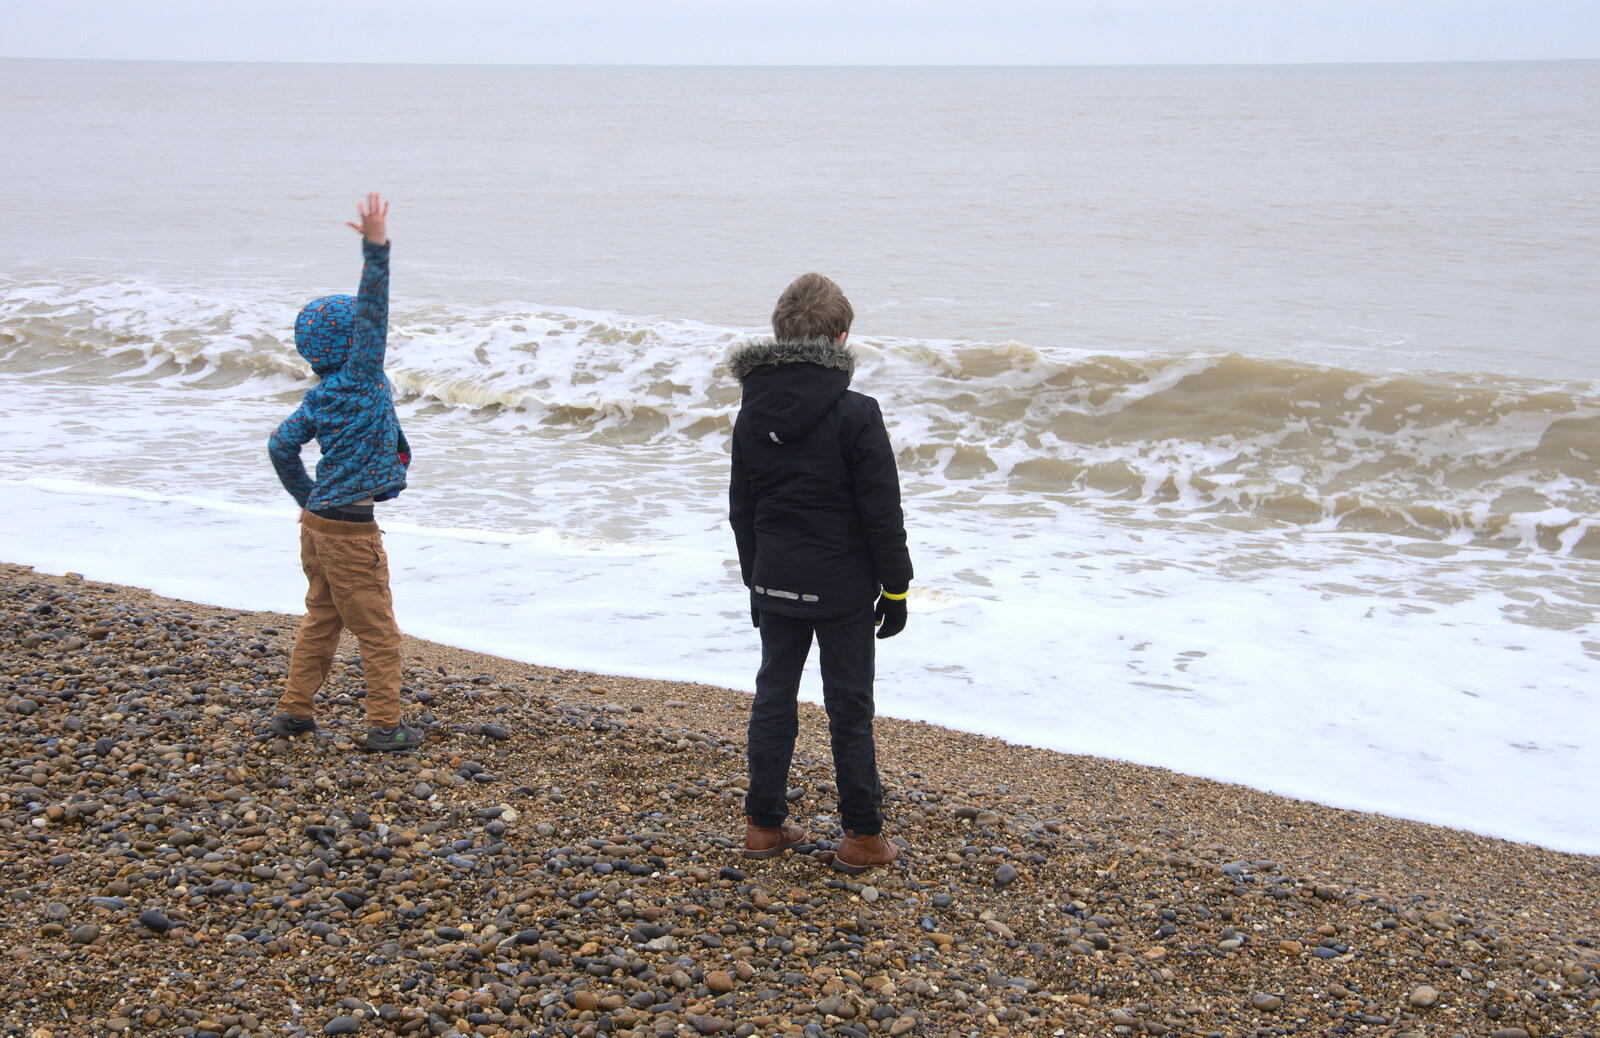 Harry flings stones at the sea from A Postcard from Aldeburgh, Suffolk - 6th January 2019